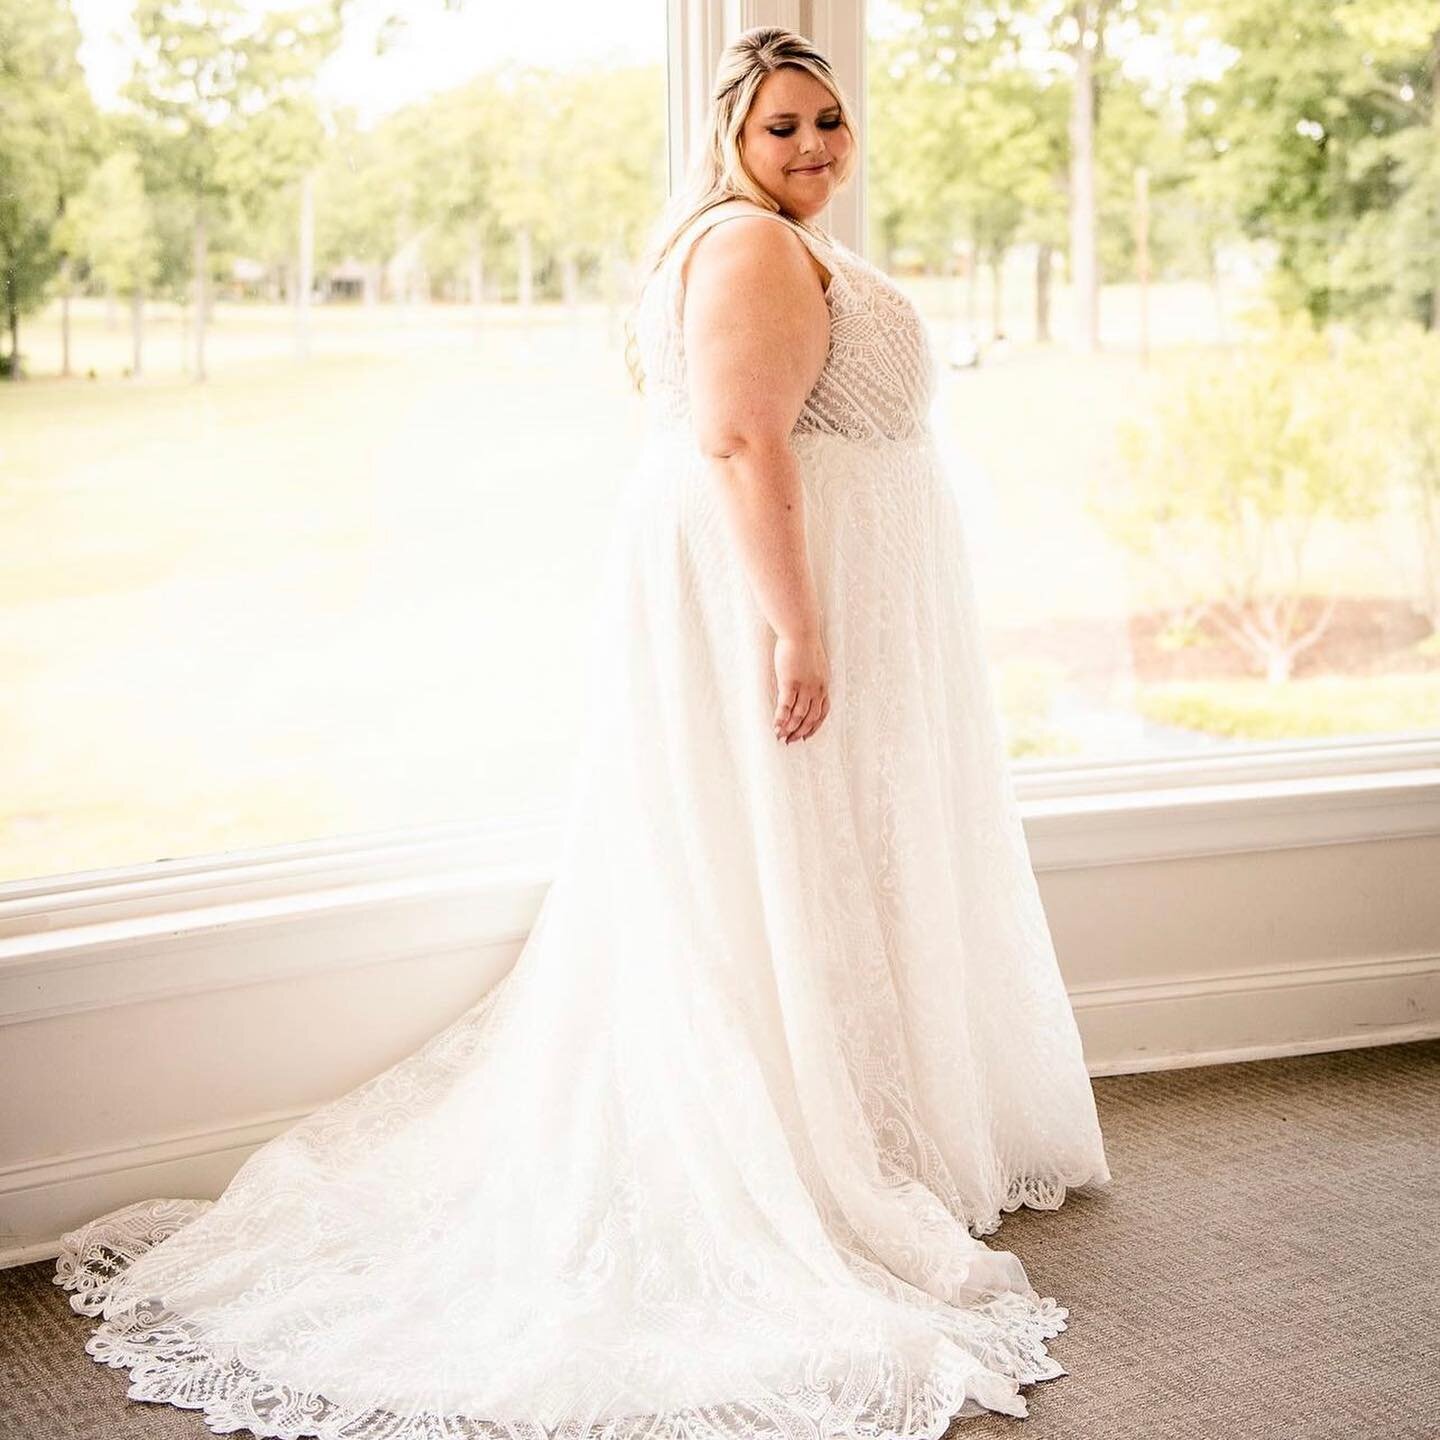 Congratulations Katie on your classic wedding day look with a twist. The lace pattern on her dress was fun and unique. We were so happy to help you achieve your wedding day look, done your way 😉

Bride: @thekatieway1 
Dress: SEYCHELLES BY @gavinchri